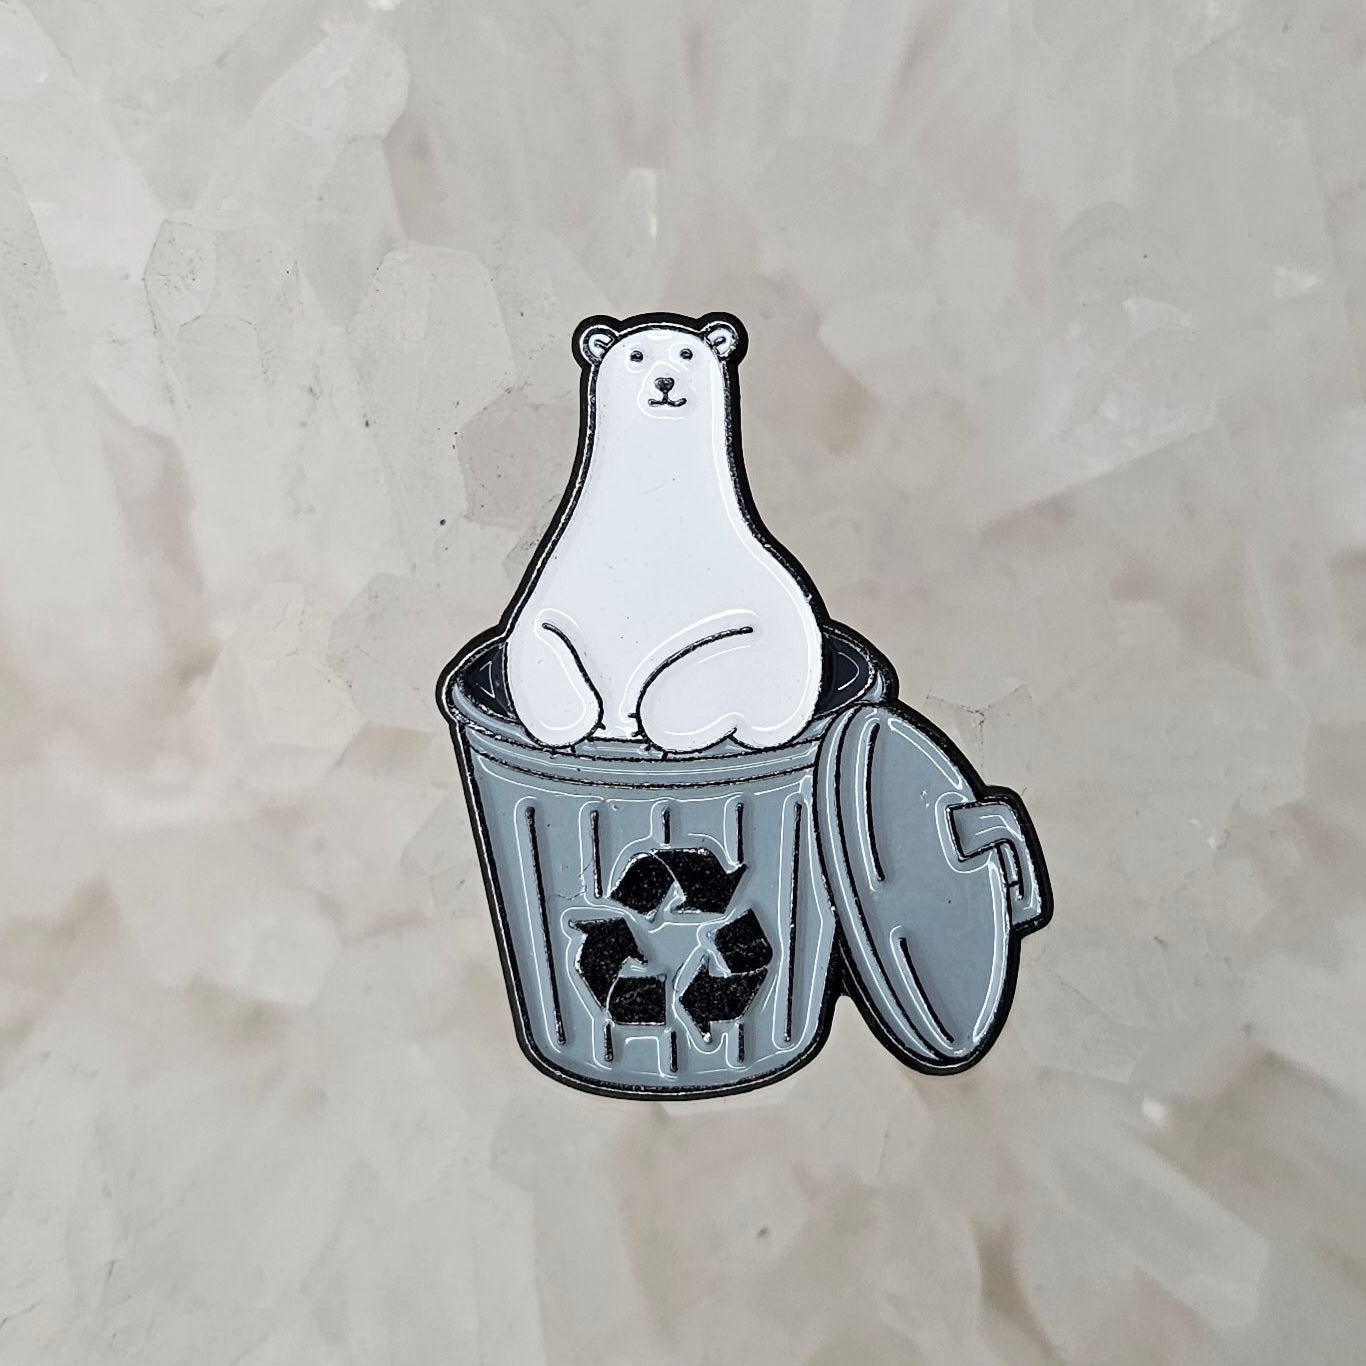 Pin on recycle